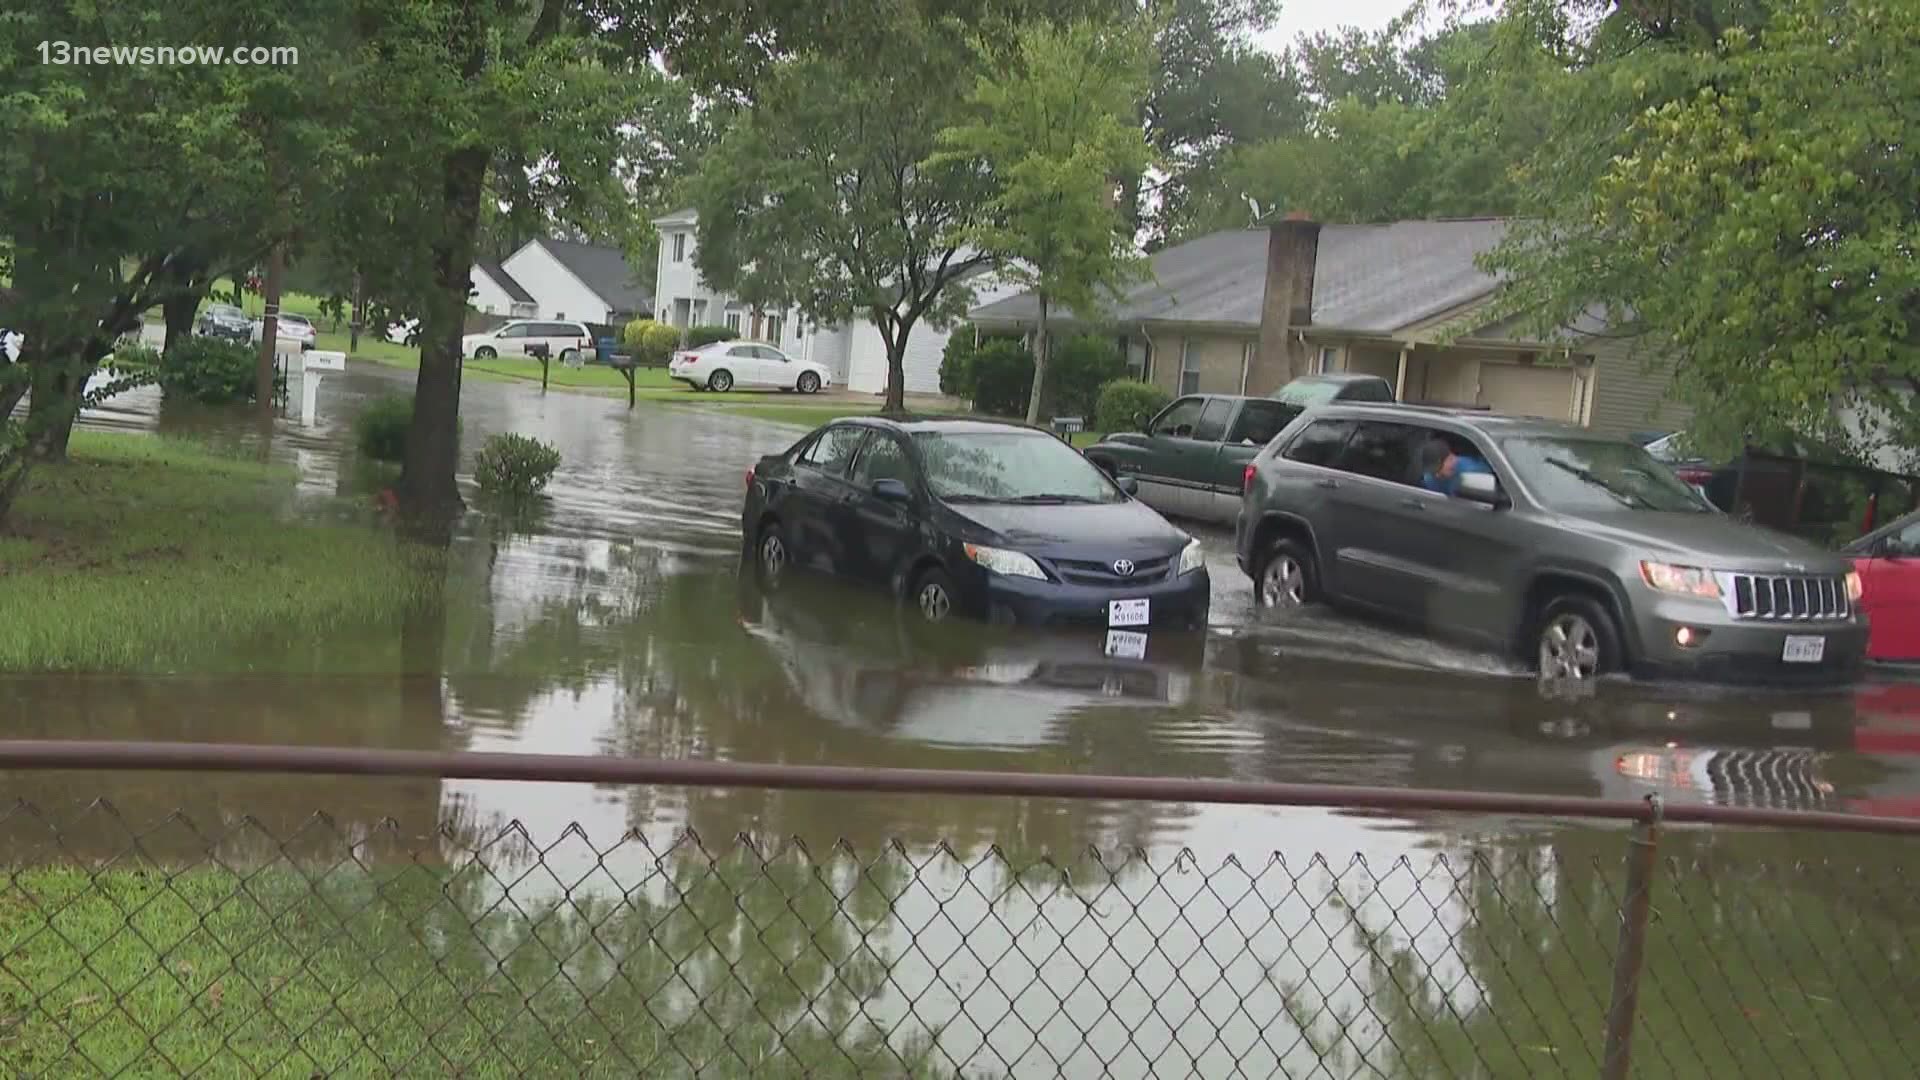 13News Now Madison Kimbro visited parts of Virginia Beach where roads were submerged in high floodwaters.